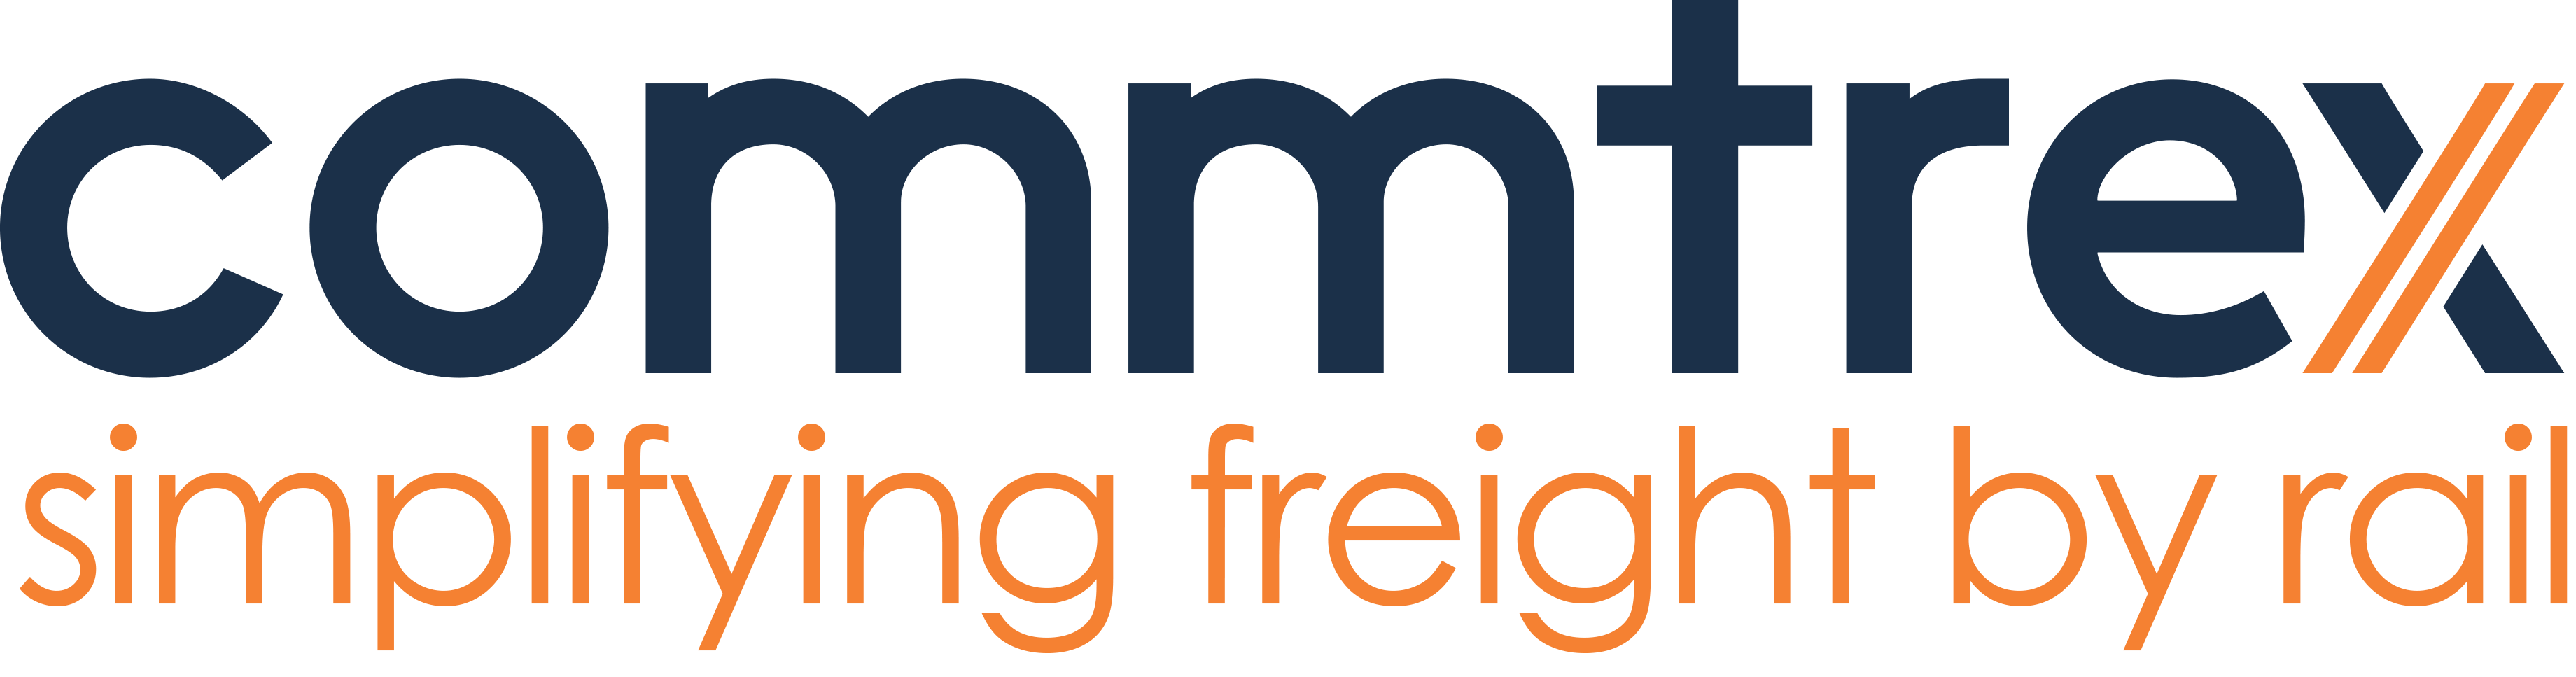 COMMTREX LOGO Withtagline Simplifying Freight By Rail